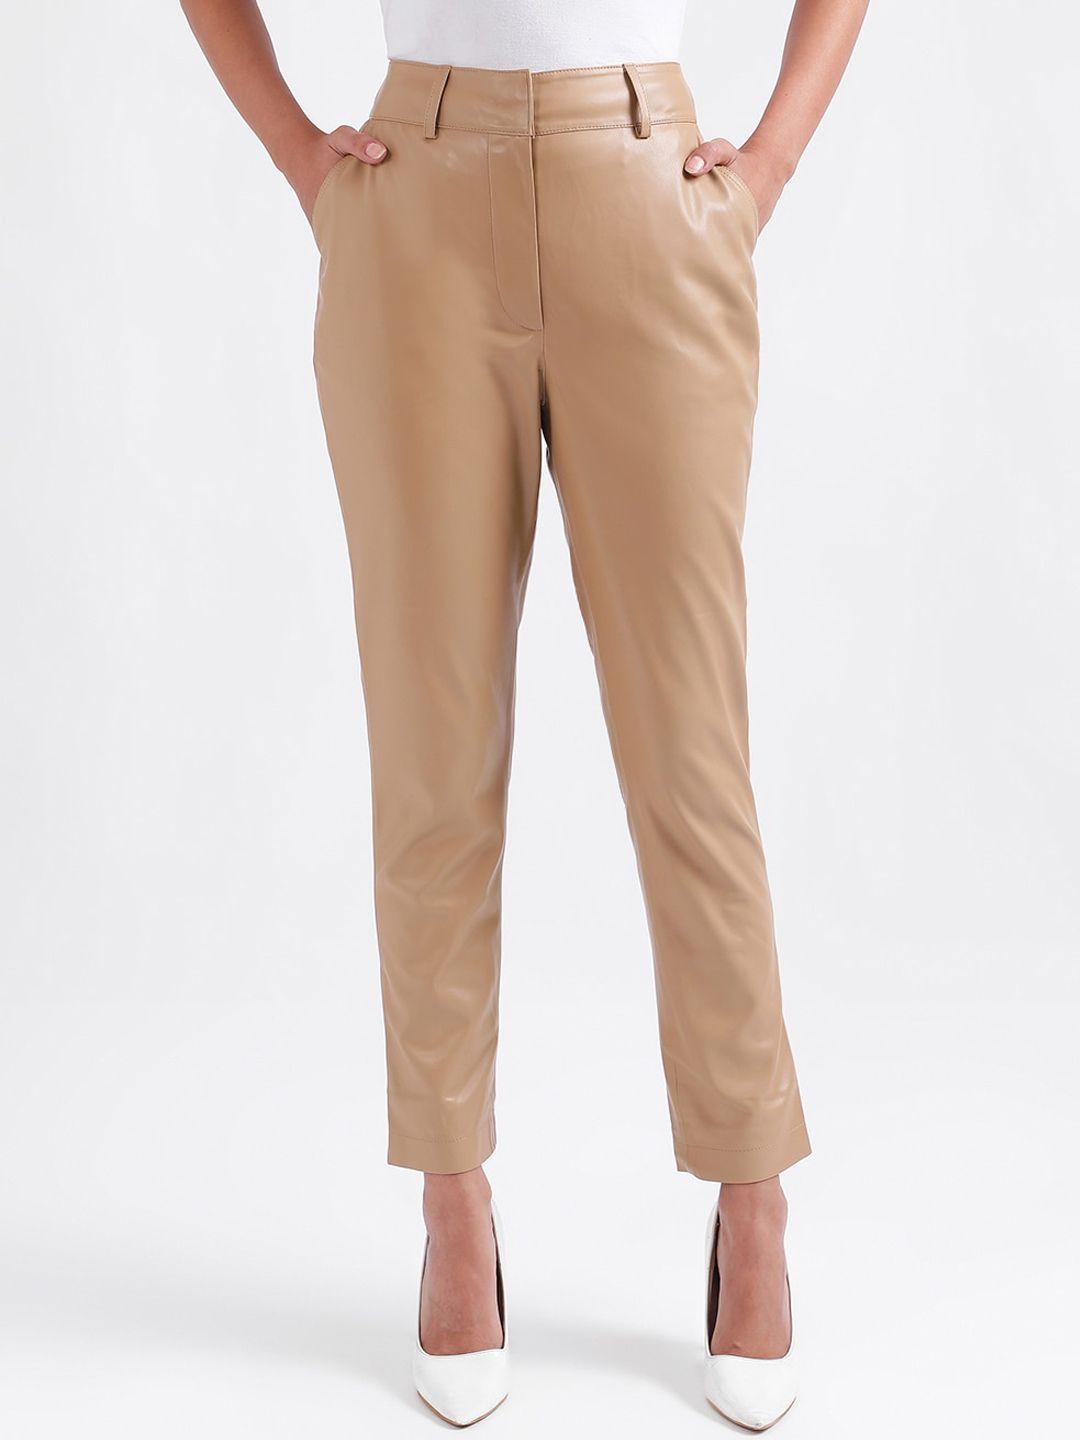 iconic women mid-rise regular fit cigarette trousers